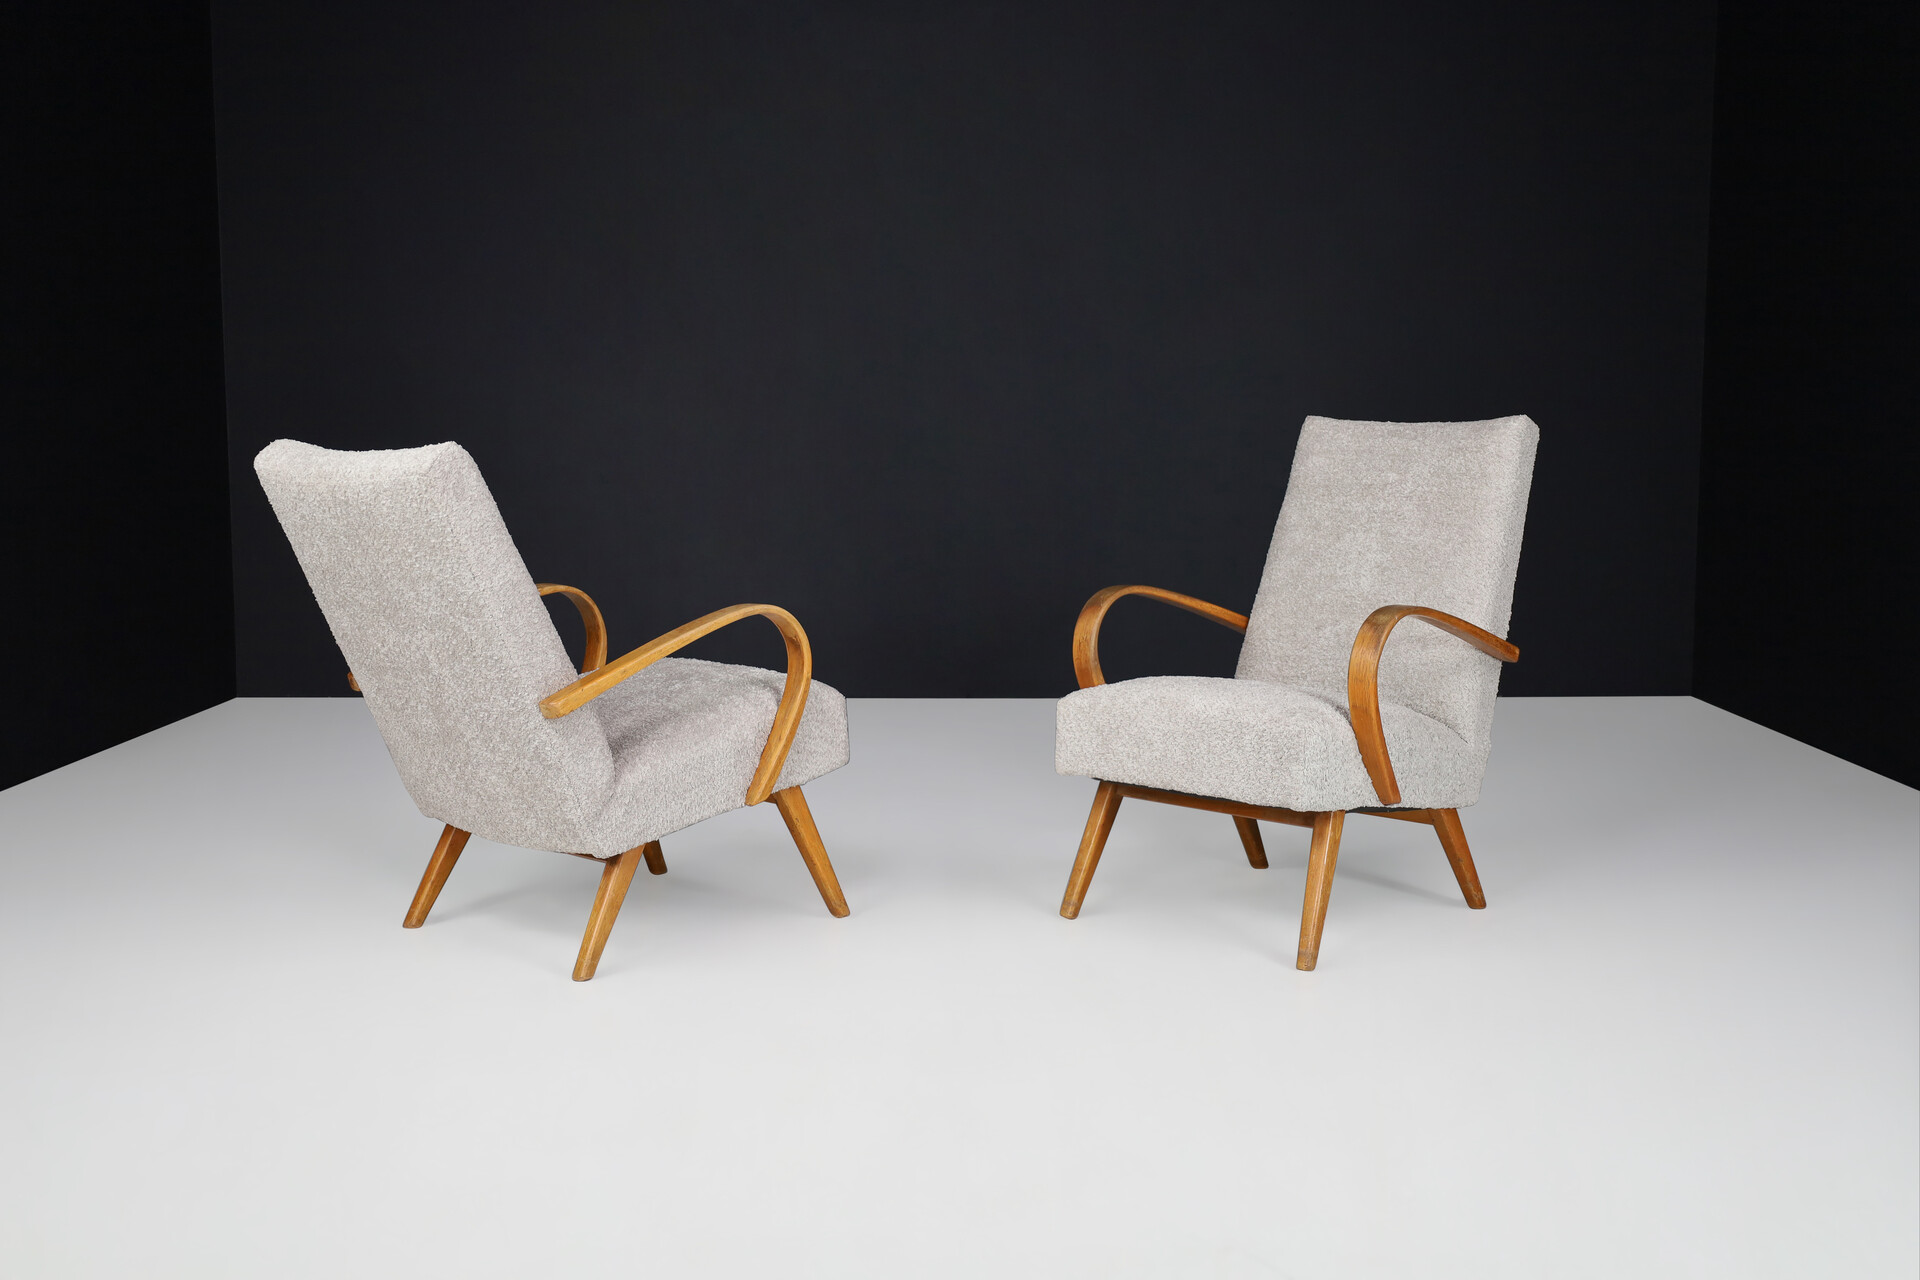 Mid century modern Bentwood Arm Chairs / Lounge Chairs With New Upholstered Bouclé Fabric, Praque 1950s Mid-20th century